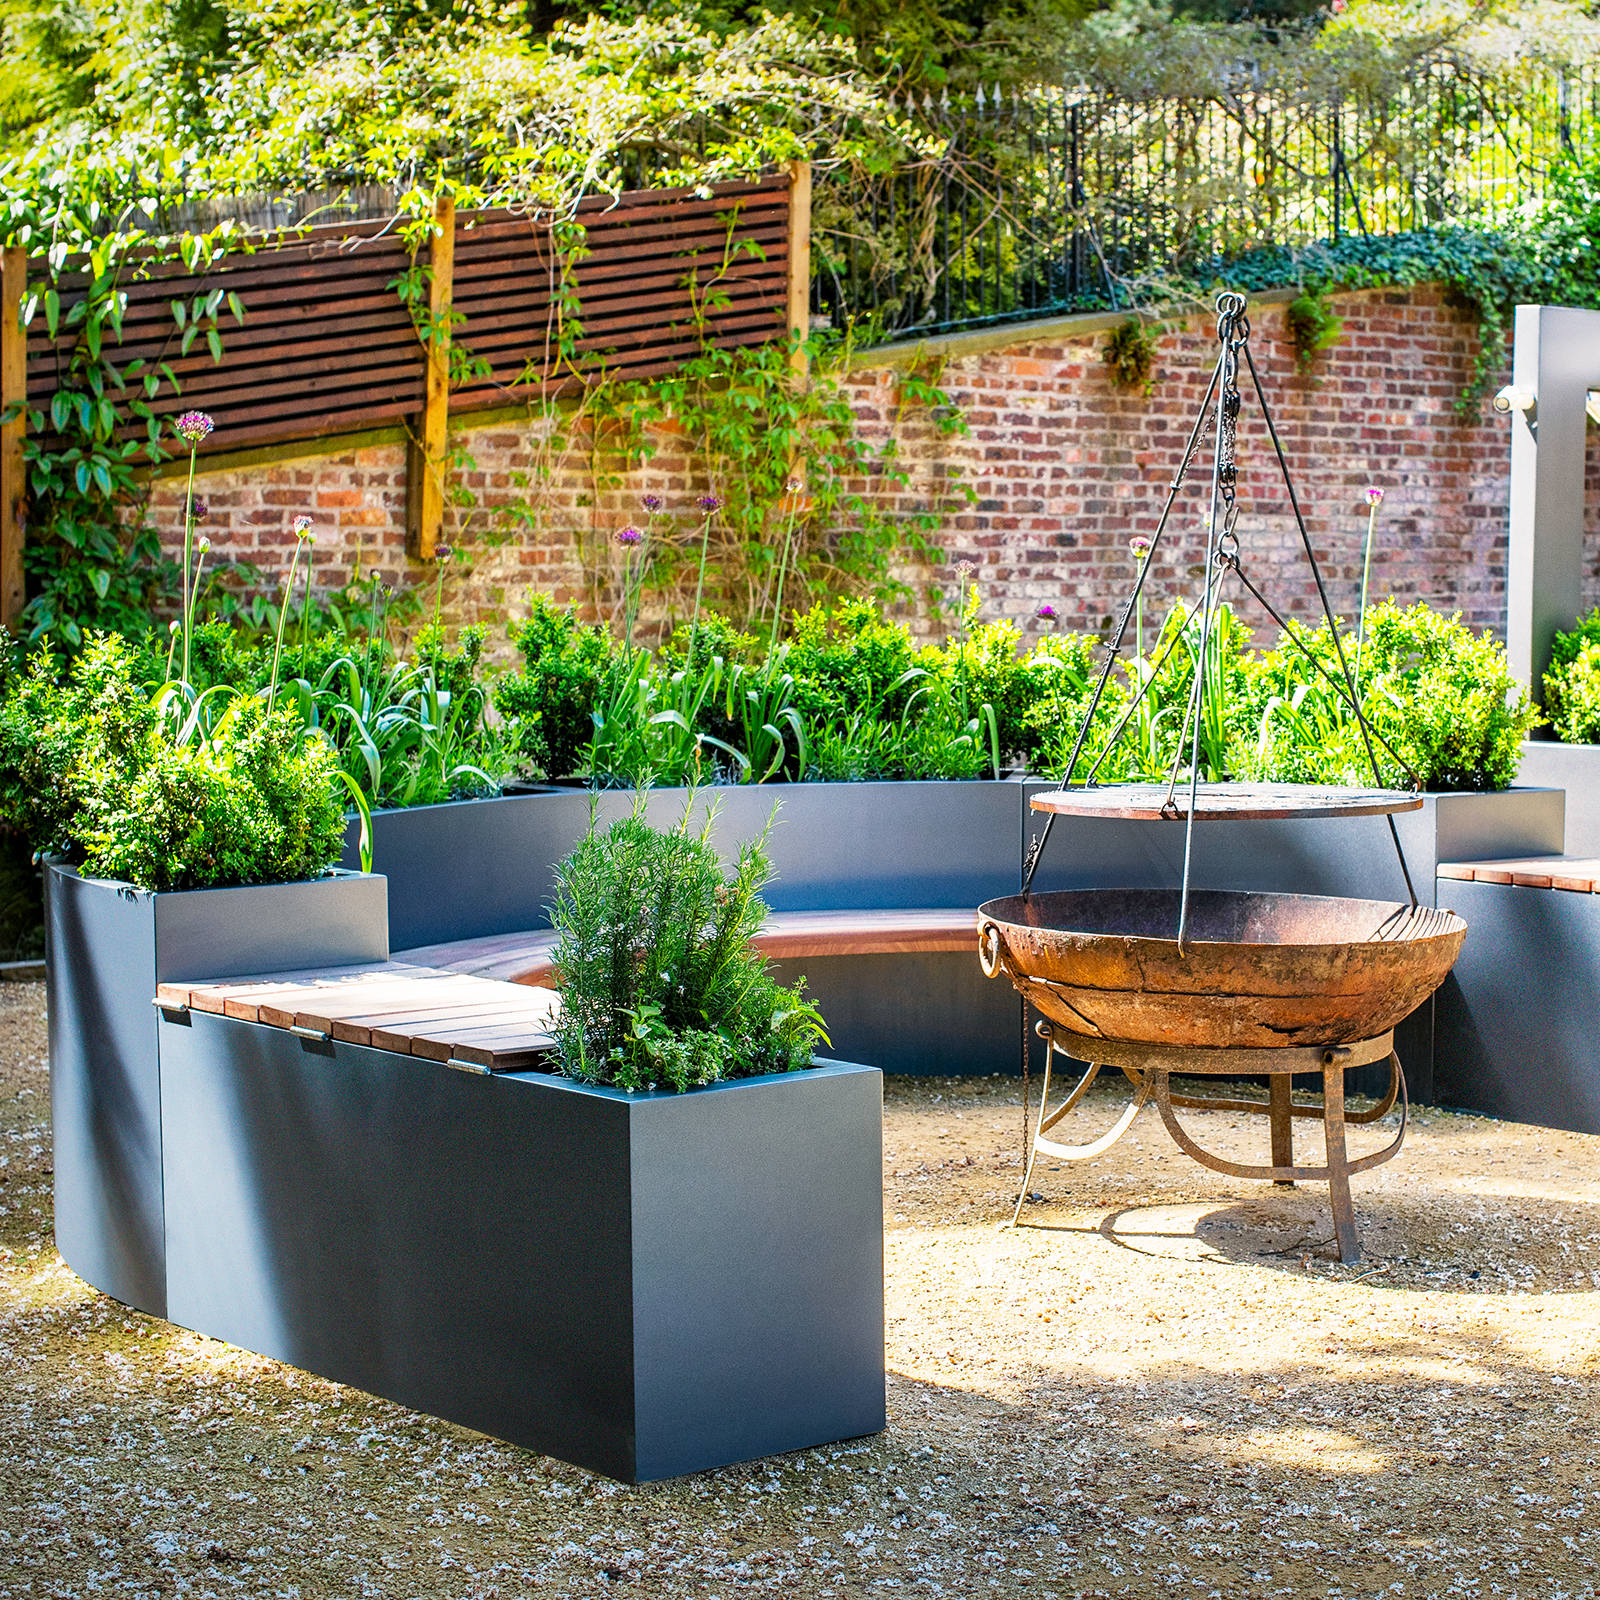 Curved Planter benches - Europlanters Curved Planter Benches